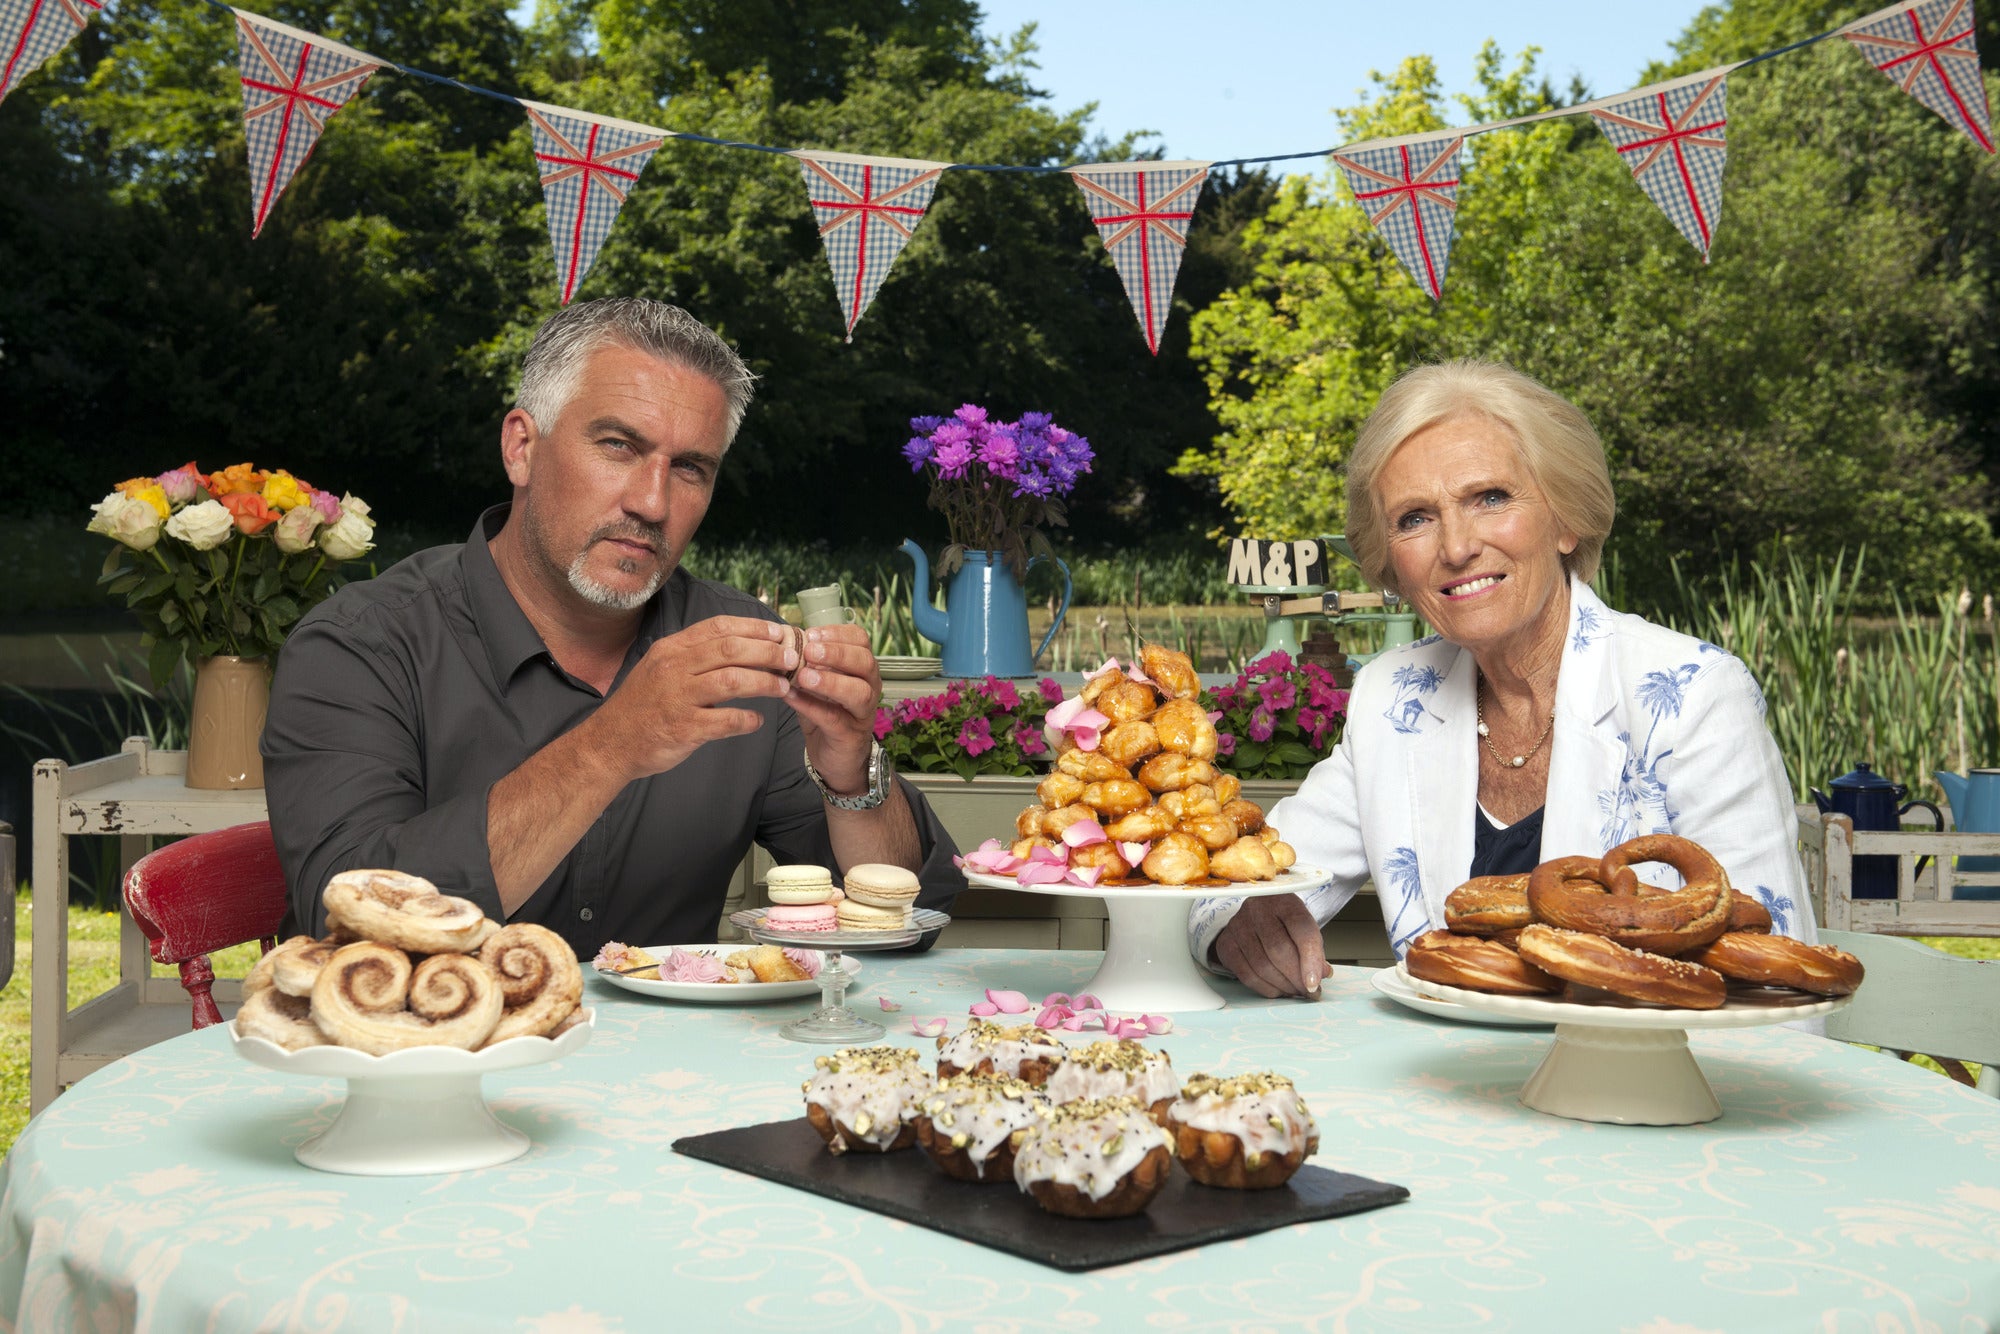 The Great British Bake Off, BBC Two